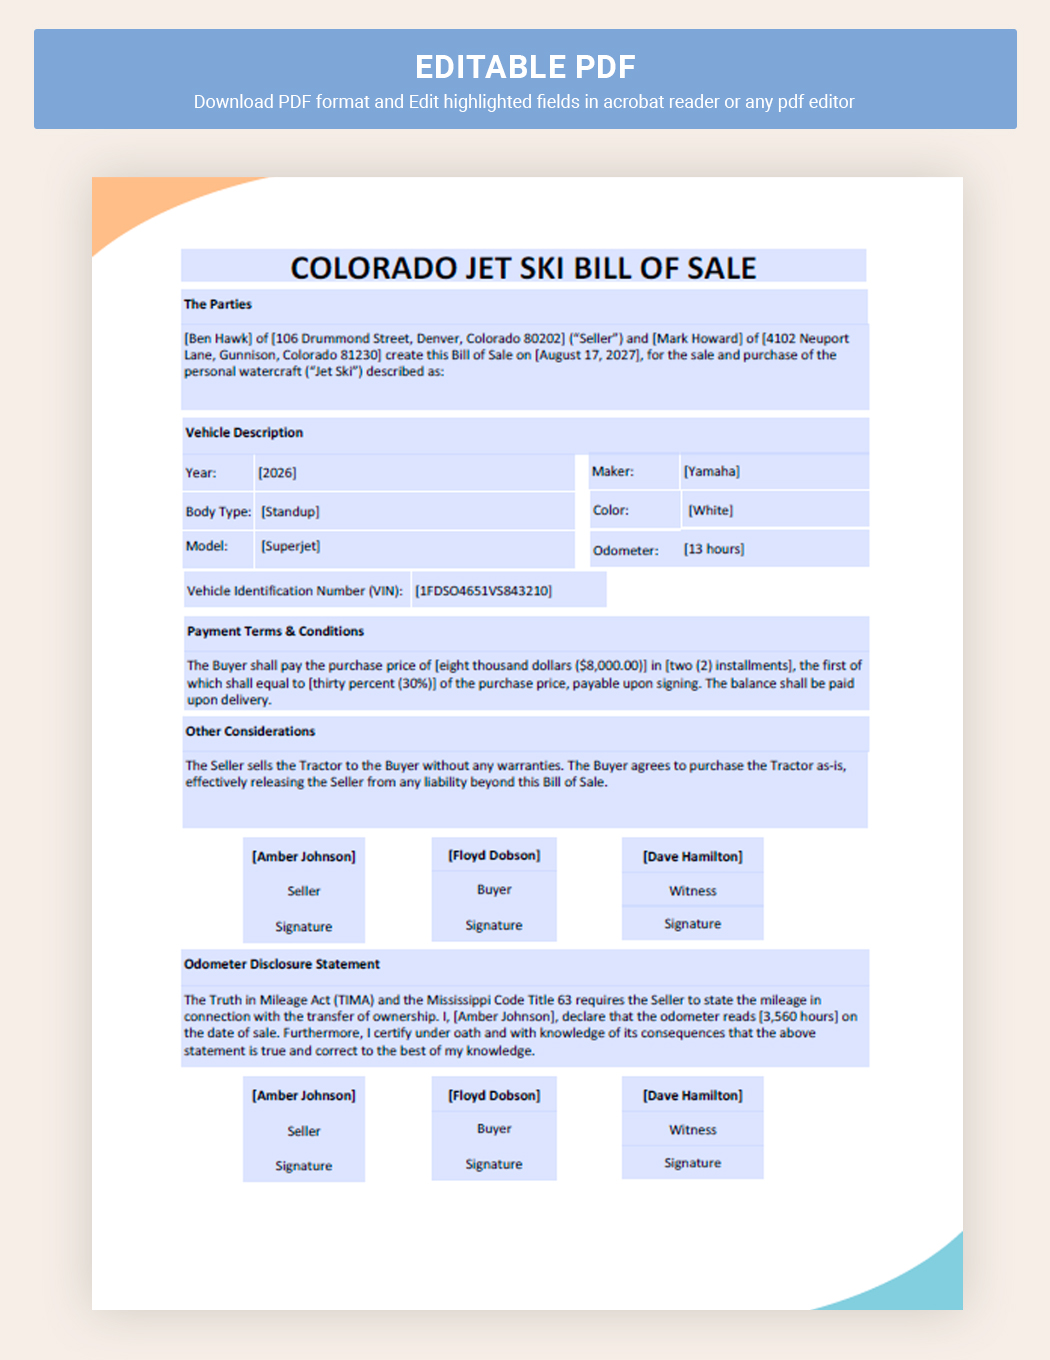 Mississippi Tractor Bill Of Sale Form Template